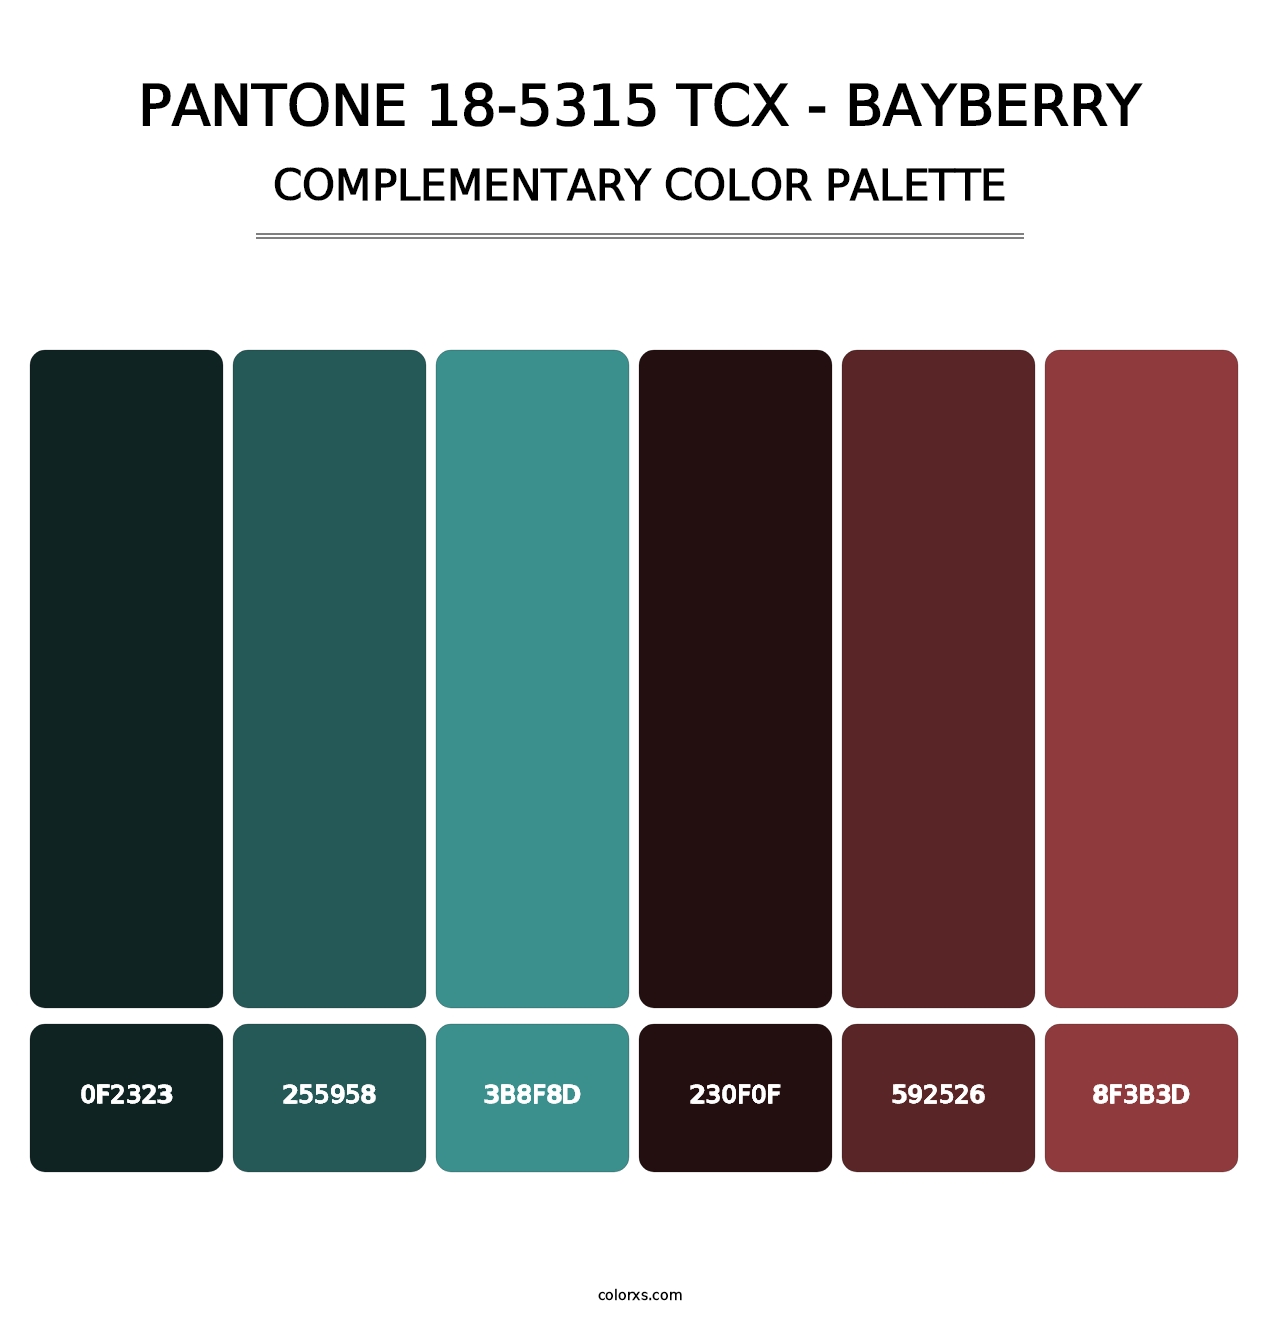 PANTONE 18-5315 TCX - Bayberry - Complementary Color Palette